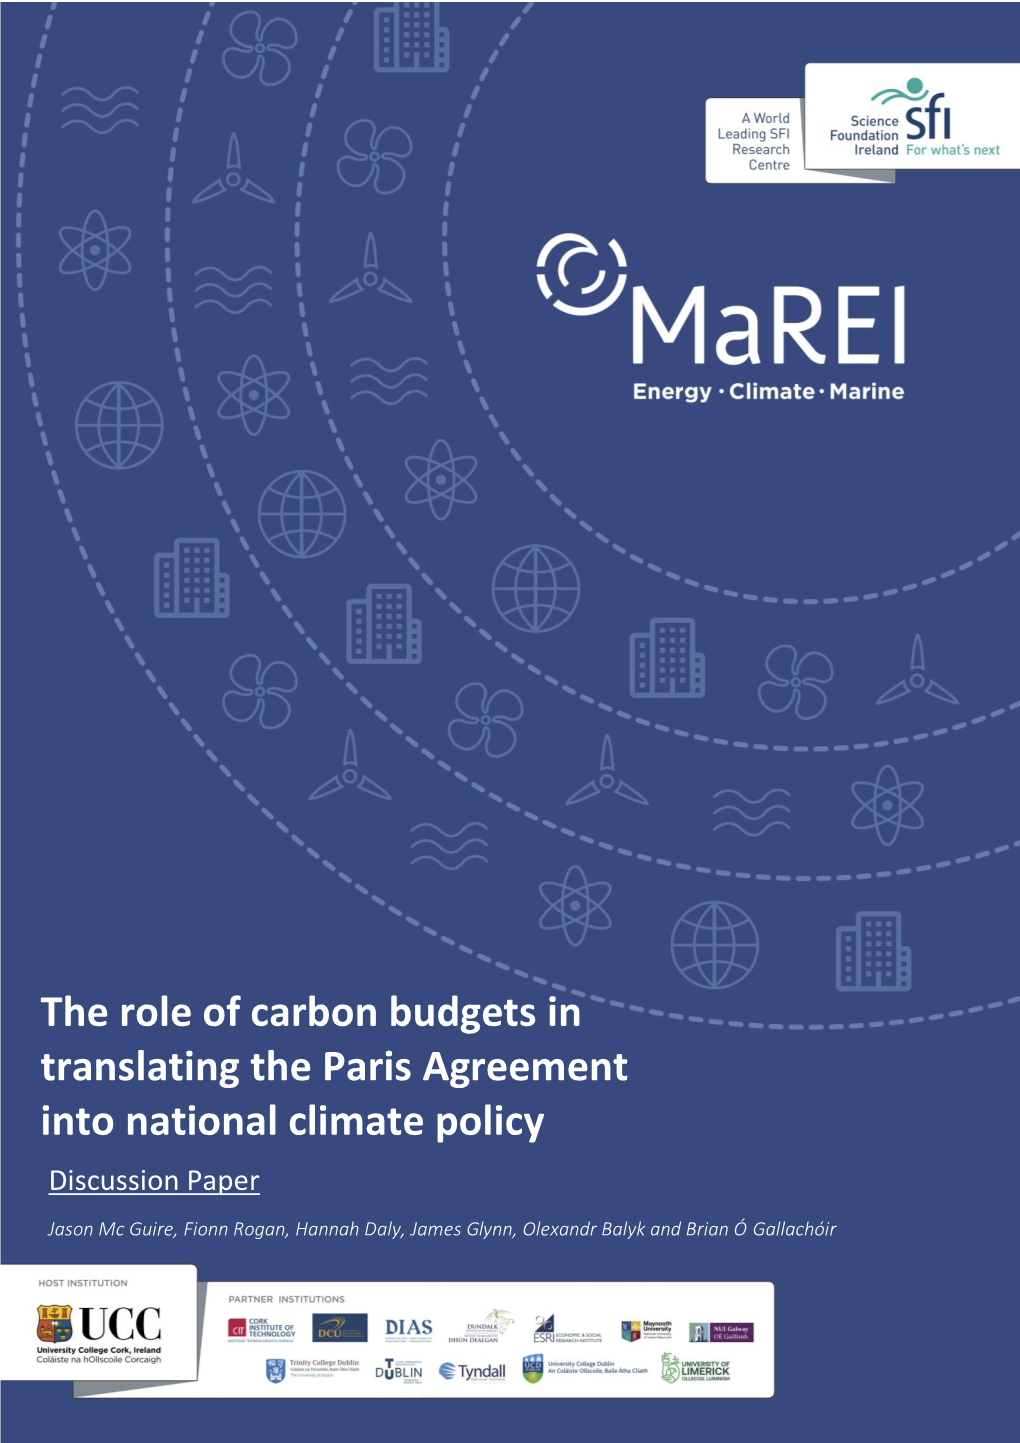 The Role of Carbon Budgets in Translating the Paris Agreement Into National Climate Policy